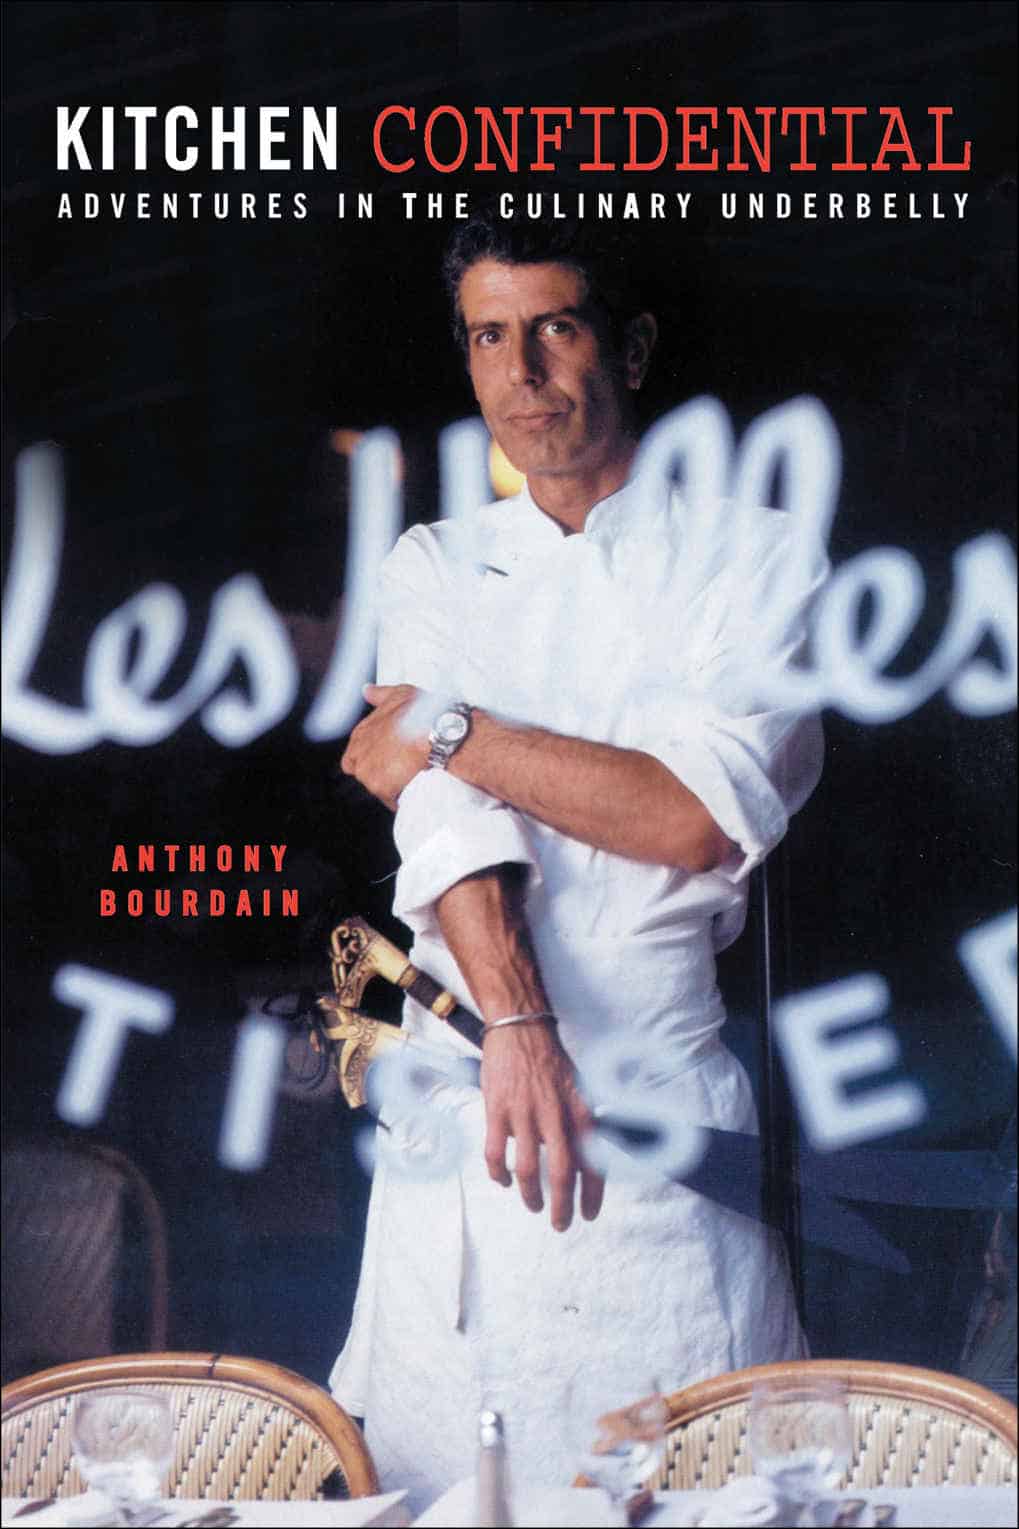 <p>The late Anthony Bourdain's iconic memoir is a hit with readers. Bourdain's raw and unfiltered storytelling about the gritty reality of the culinary world will keep you laughing and blow your mind about the restaurant industry — often on the same page. </p>    <p>It provides an exciting and behind-the-scenes look into the chaotic and intense restaurant culture, captivating foodies, aspiring chefs, and nonfiction-loving readers alike. Not to mention, it'll change the way you think about going out to eat forever.</p>    <ul> <li><strong>Author:</strong> Anthony Bourdain</li>    <li><strong>Page count:</strong> 312</li>    <li><strong>First published:</strong> 2000</li> </ul>